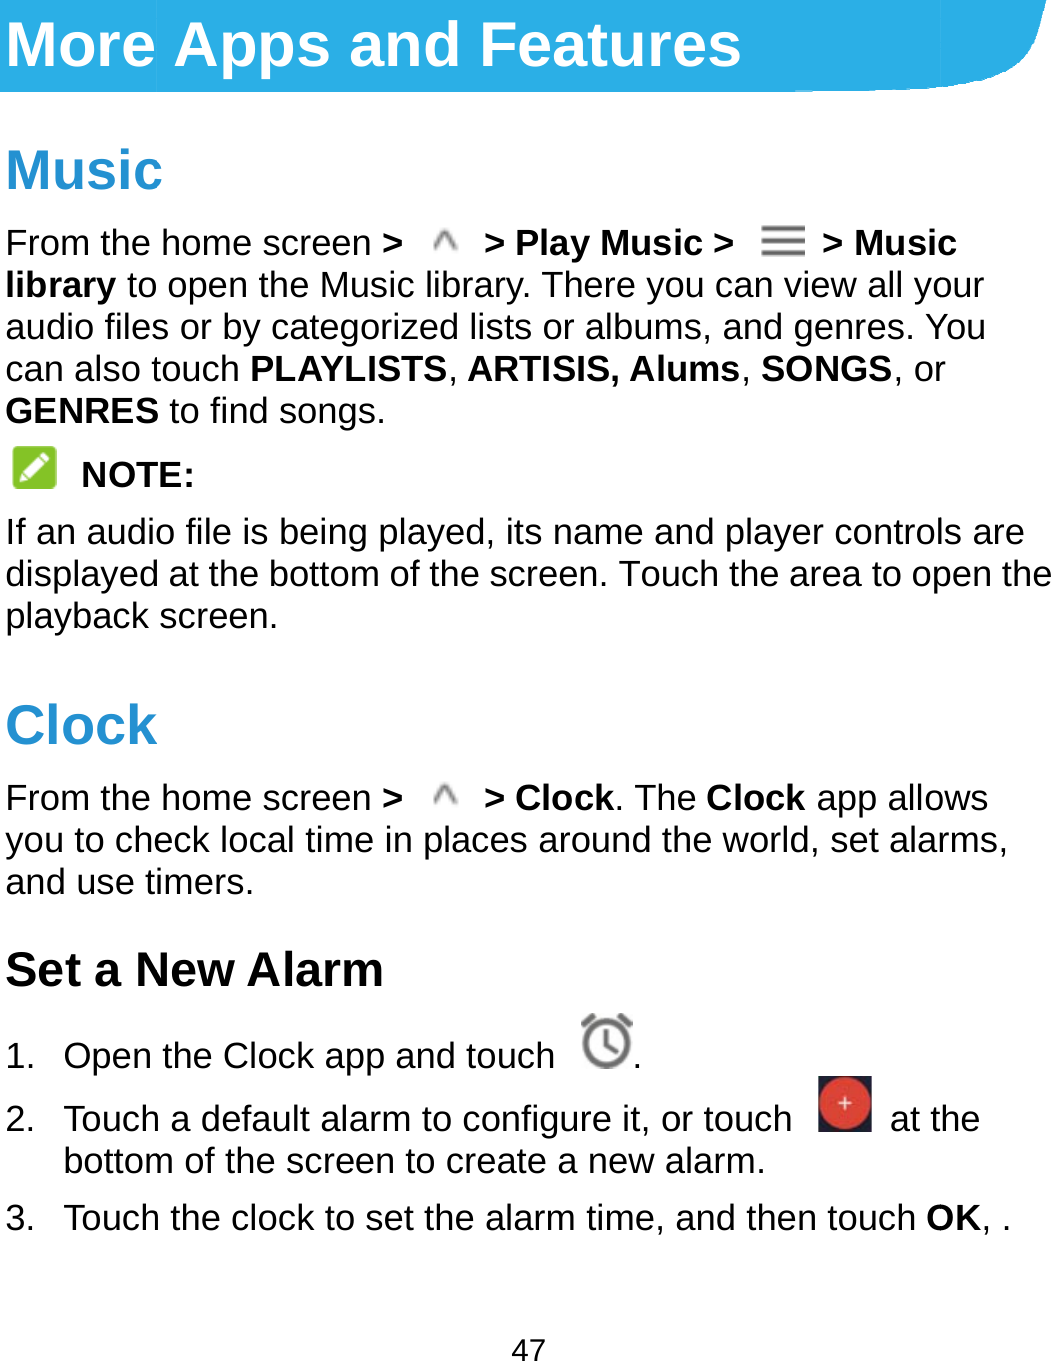 More MusicFrom the library toaudio filescan also tGENRES NOTIf an audidisplayedplayback ClockFrom the you to cheand use tSet a N1. Open 2. Touchbottom3. TouchApps anc home screen &gt;  open the Music s or by categoriztouch PLAYLISTS to find songs. TE: o file is being plad at the bottom ofscreen. k home screen &gt; eck local time in imers. New Alarm the Clock app ah a default alarm m of the screen toh the clock to set  47 nd Feature &gt; Play Musilibrary. There yozed lists or albumTS, ARTISIS, Aluayed, its name anf the screen. Tou &gt; Clock. Theplaces around thnd touch  .to configure it, oo create a new athe alarm time, aes ic &gt;  &gt; Musicou can view all yoms, and genres. Yums, SONGS, ornd player controlch the area to ope Clock app allohe world, set alaror touch    at talarm. and then touch Oc our You r ls are pen the ows rms, he OK, . 